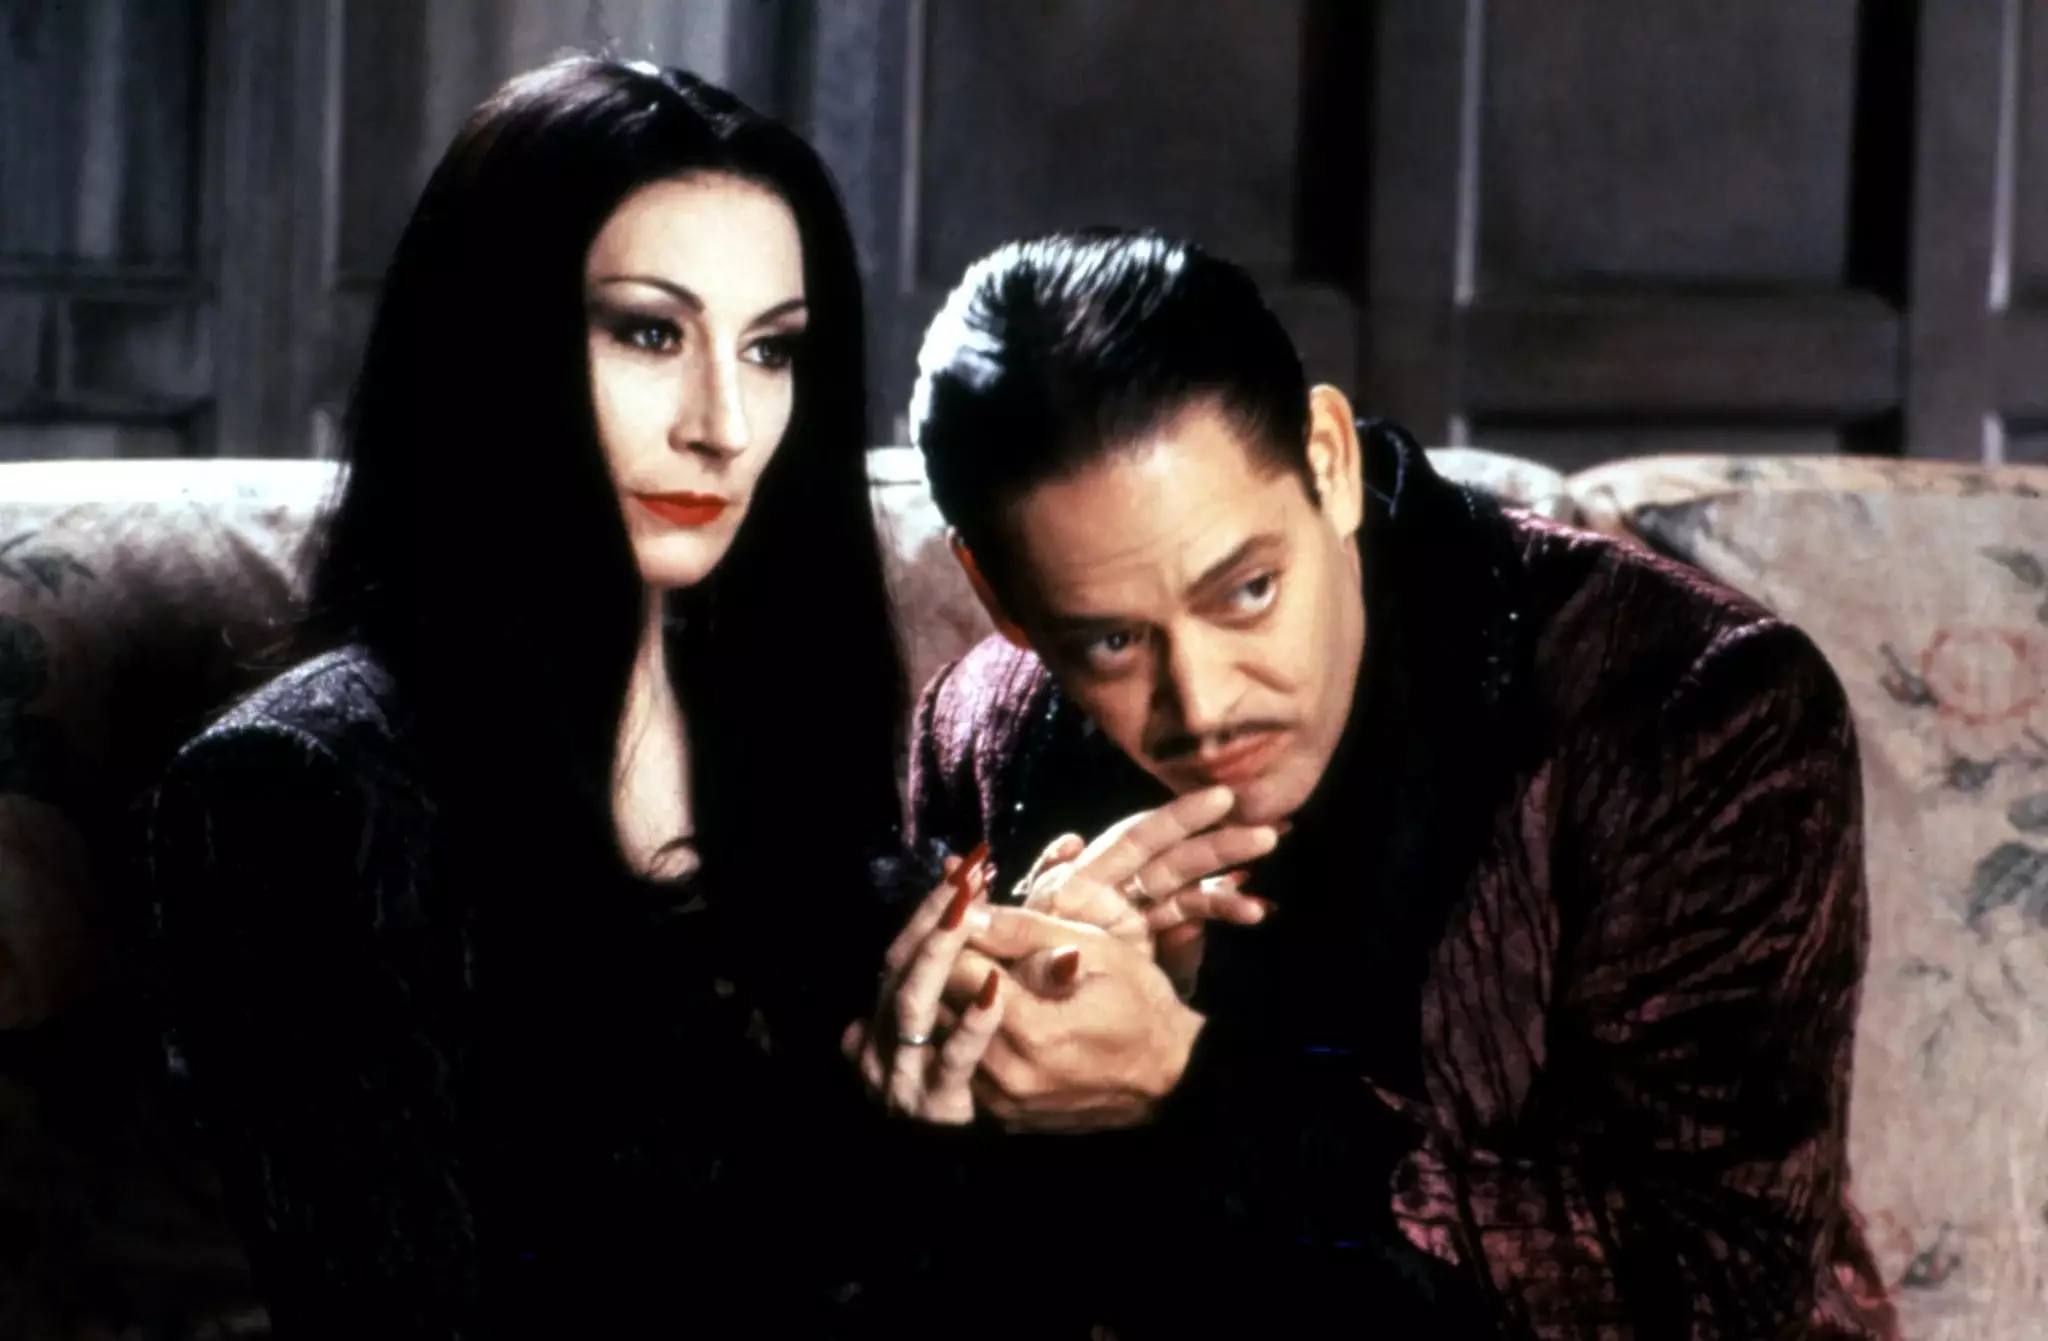 The Addams Family was first retold in a 1991 movie (